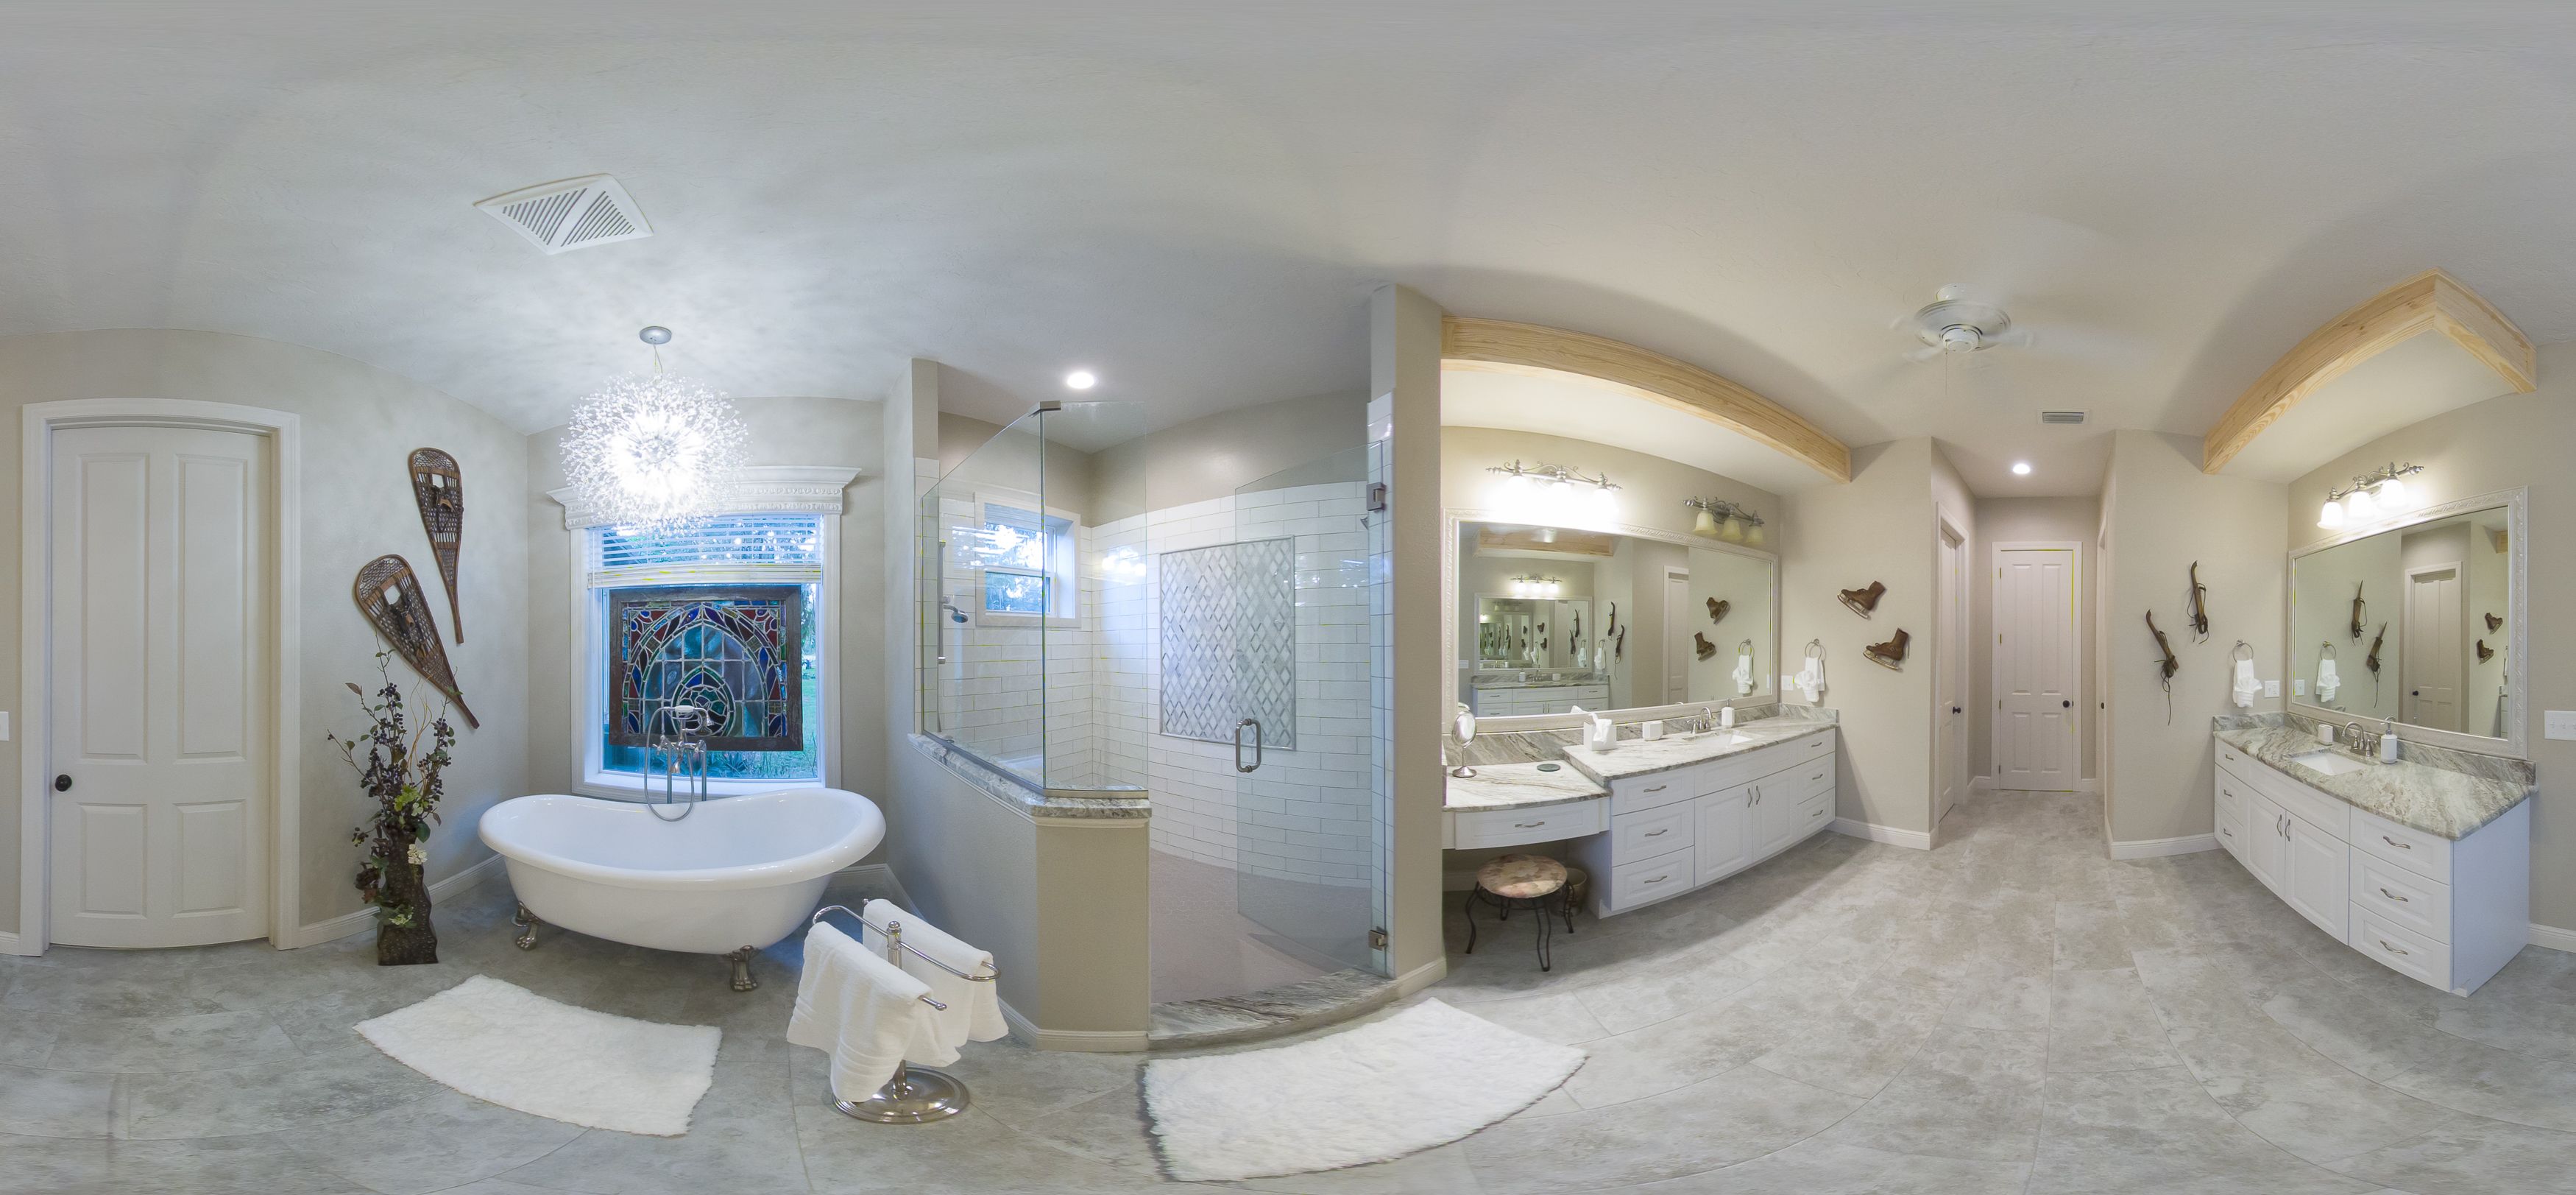 luxury ski-themed bathroom at The Lake Louisa Chateau vacation home